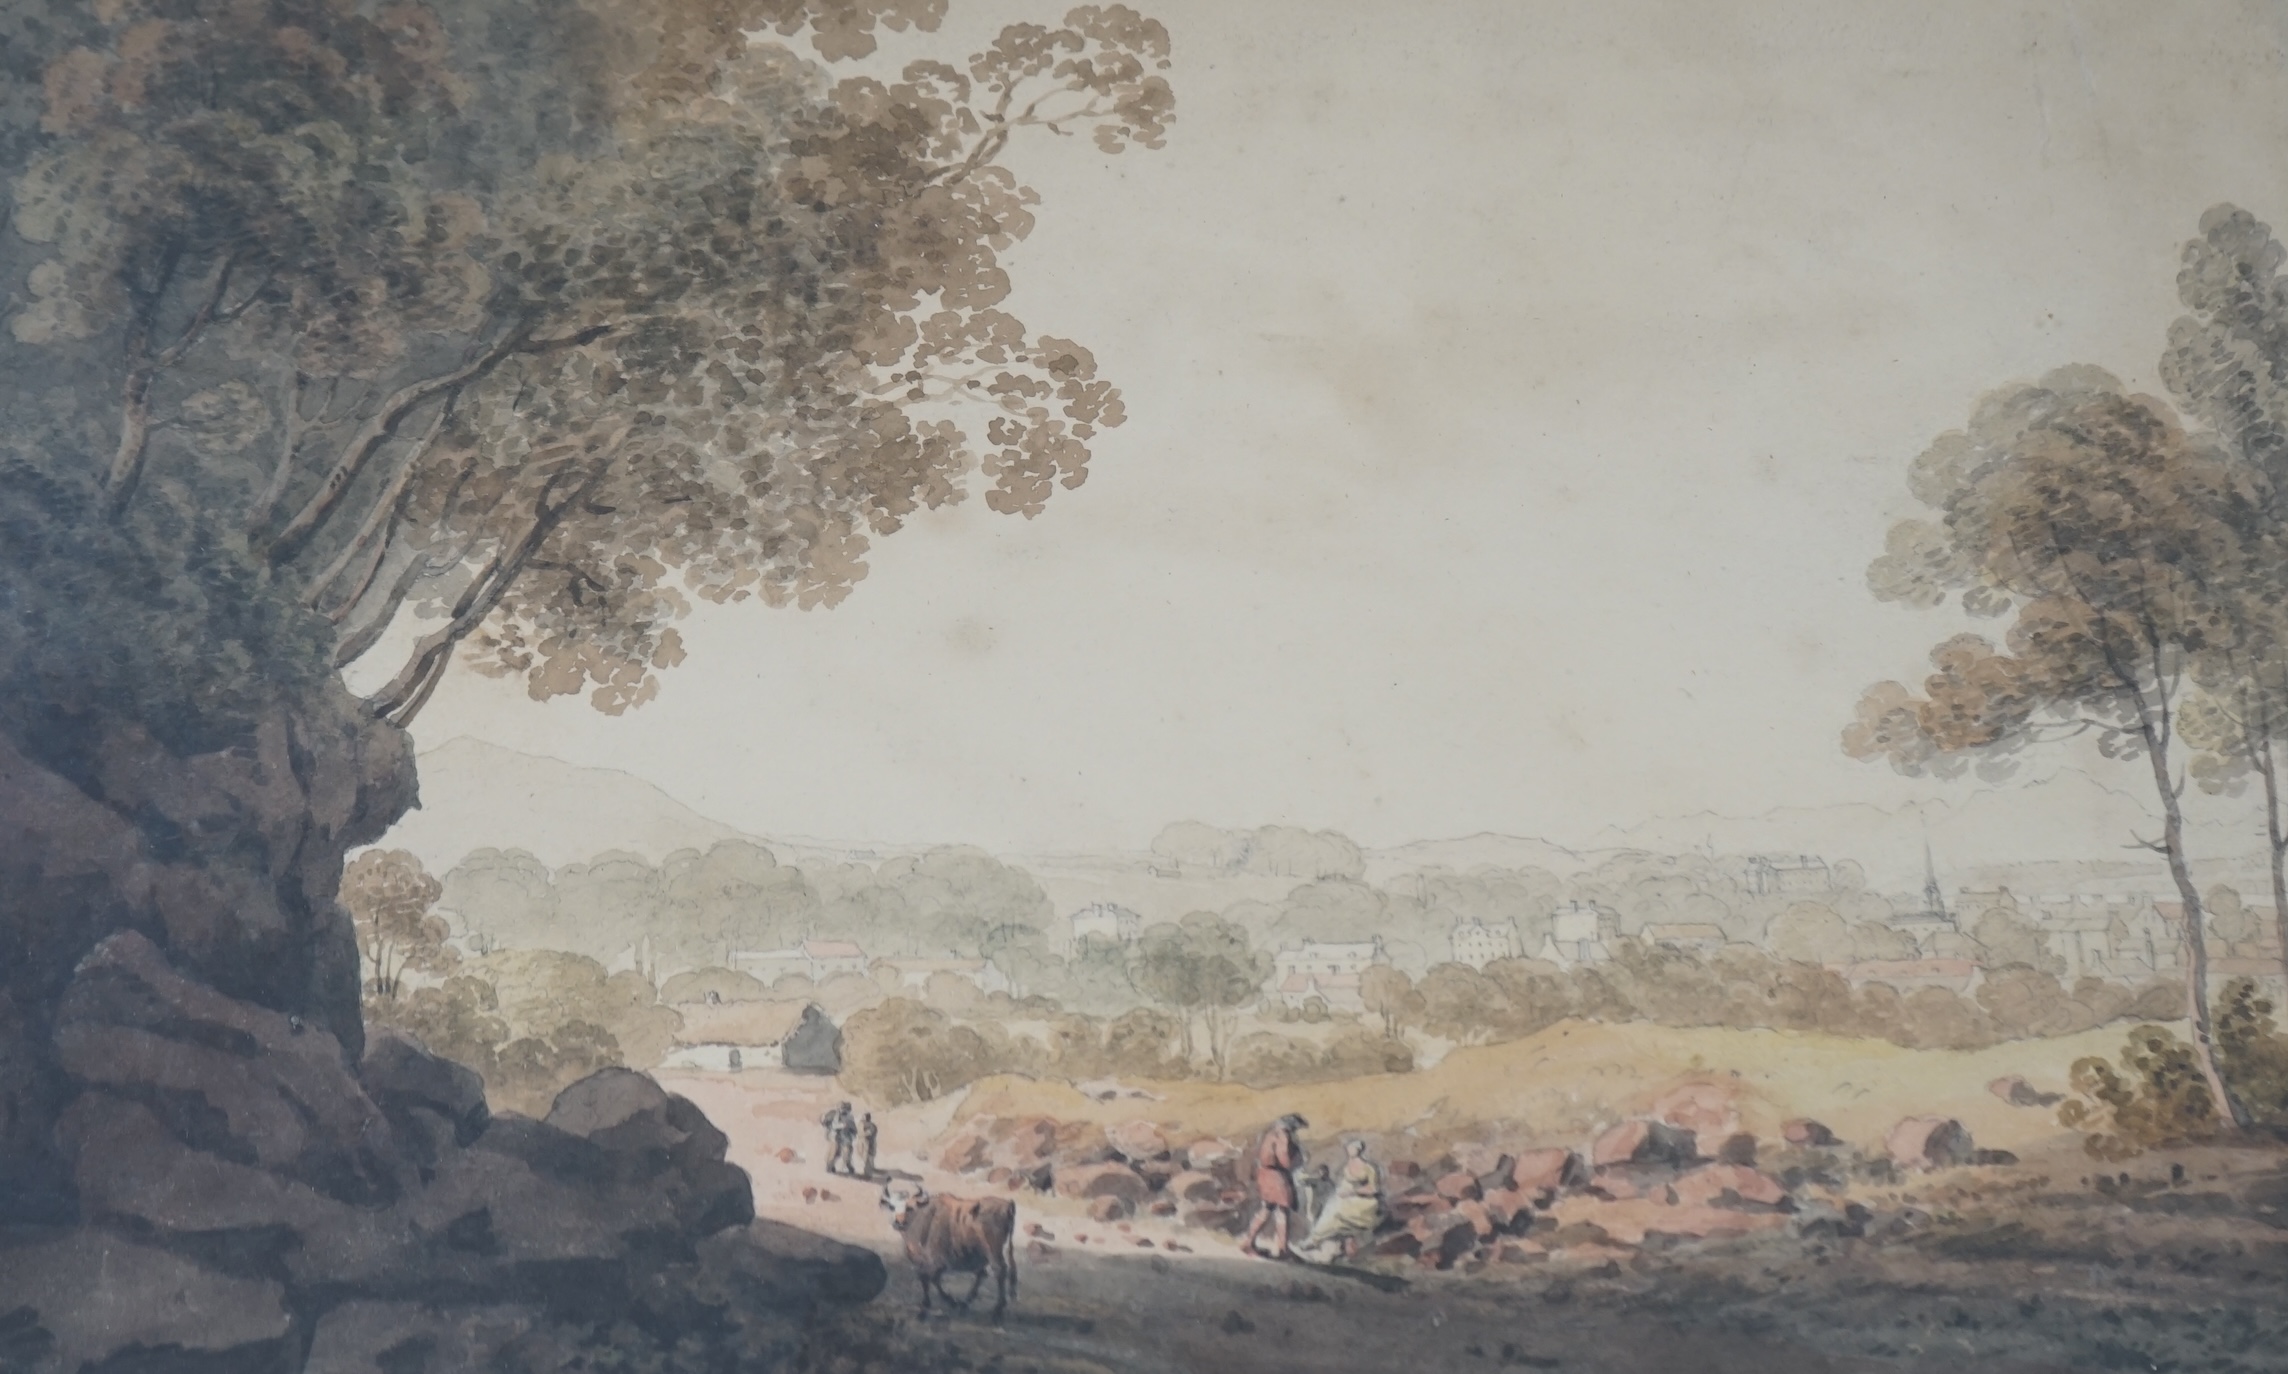 George Heriot (1759-1839), watercolour, ‘Greenock’, signed and dated 1806 in ink, 20 x 32cm. Condition - some fading and discolouration